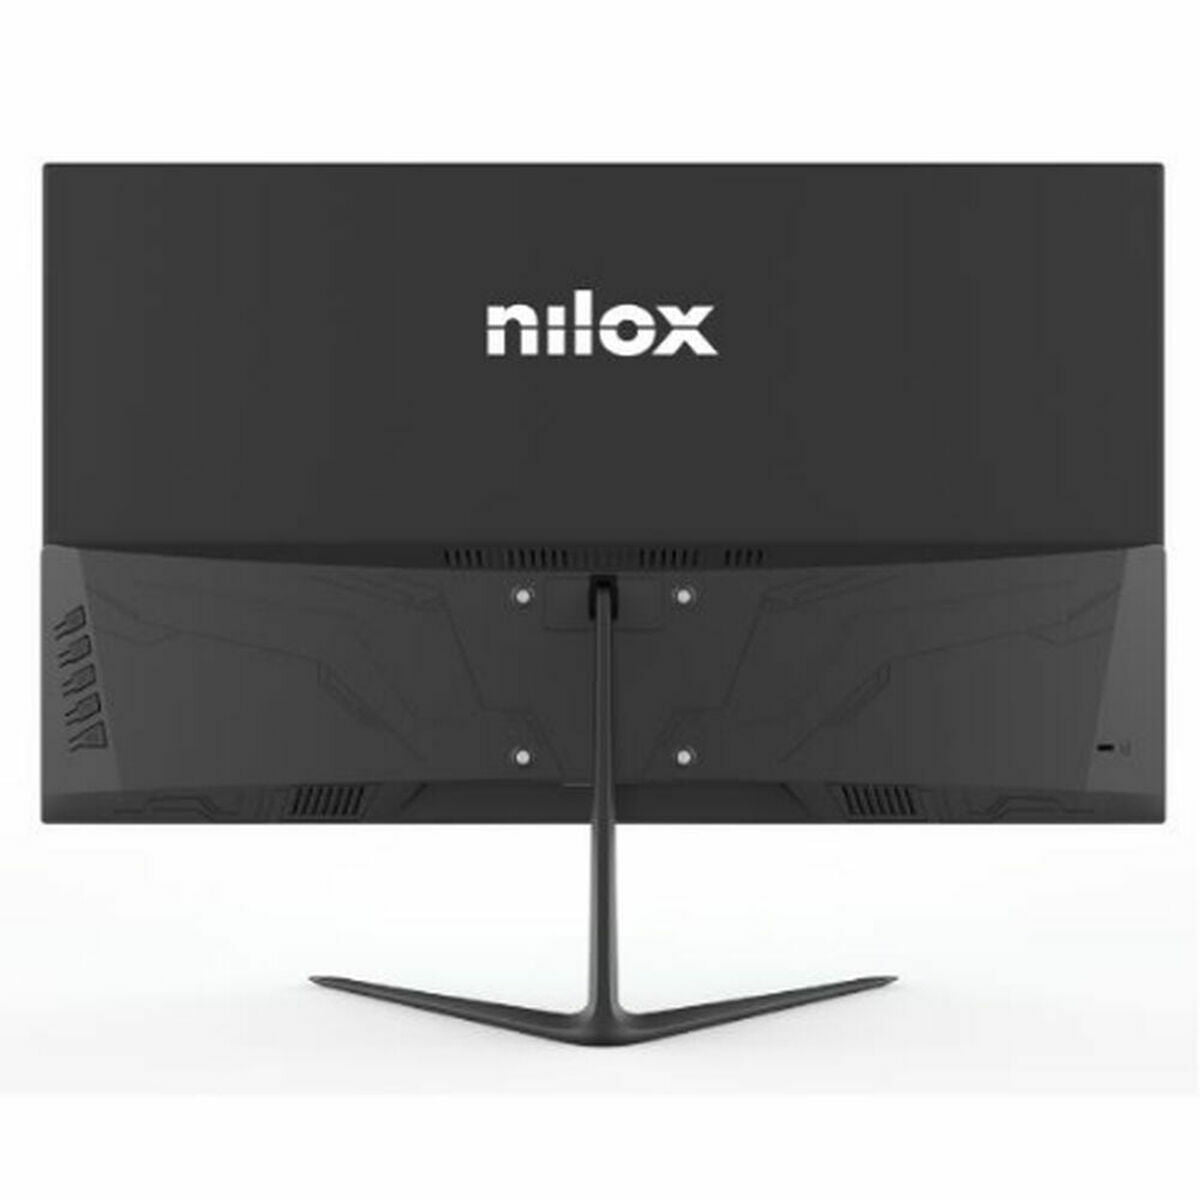 Monitor Nilox NXM27FHD751 Full HD 75 Hz, Nilox, Computing, monitor-nilox-nxm27fhd751-full-hd-75-hz, Brand_Nilox, category-reference-2609, category-reference-2642, category-reference-2644, category-reference-t-19685, category-reference-t-19902, computers / peripherals, Condition_NEW, office, Price_100 - 200, Teleworking, RiotNook